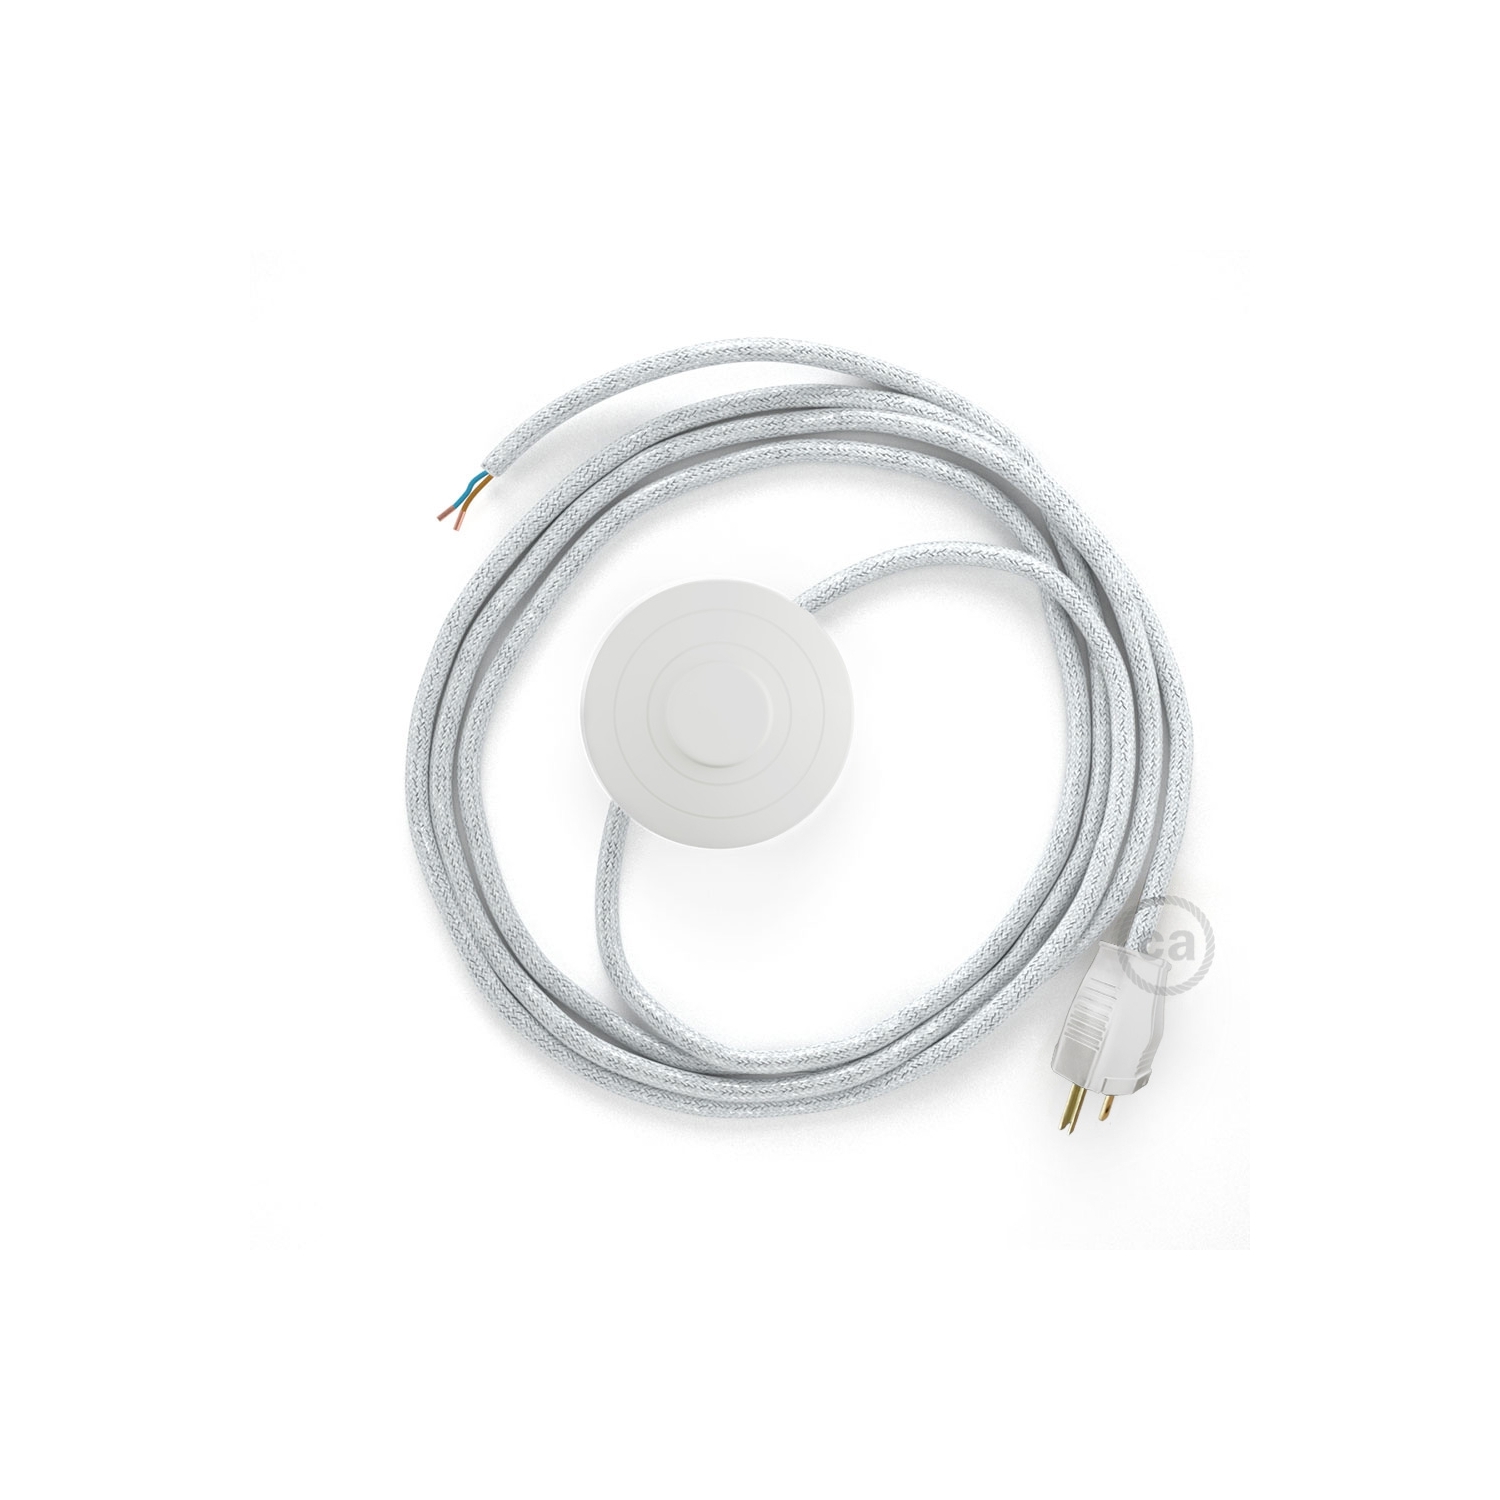 Power Cord with foot switch, RL01 White Glitter - Choose color of switch/plug